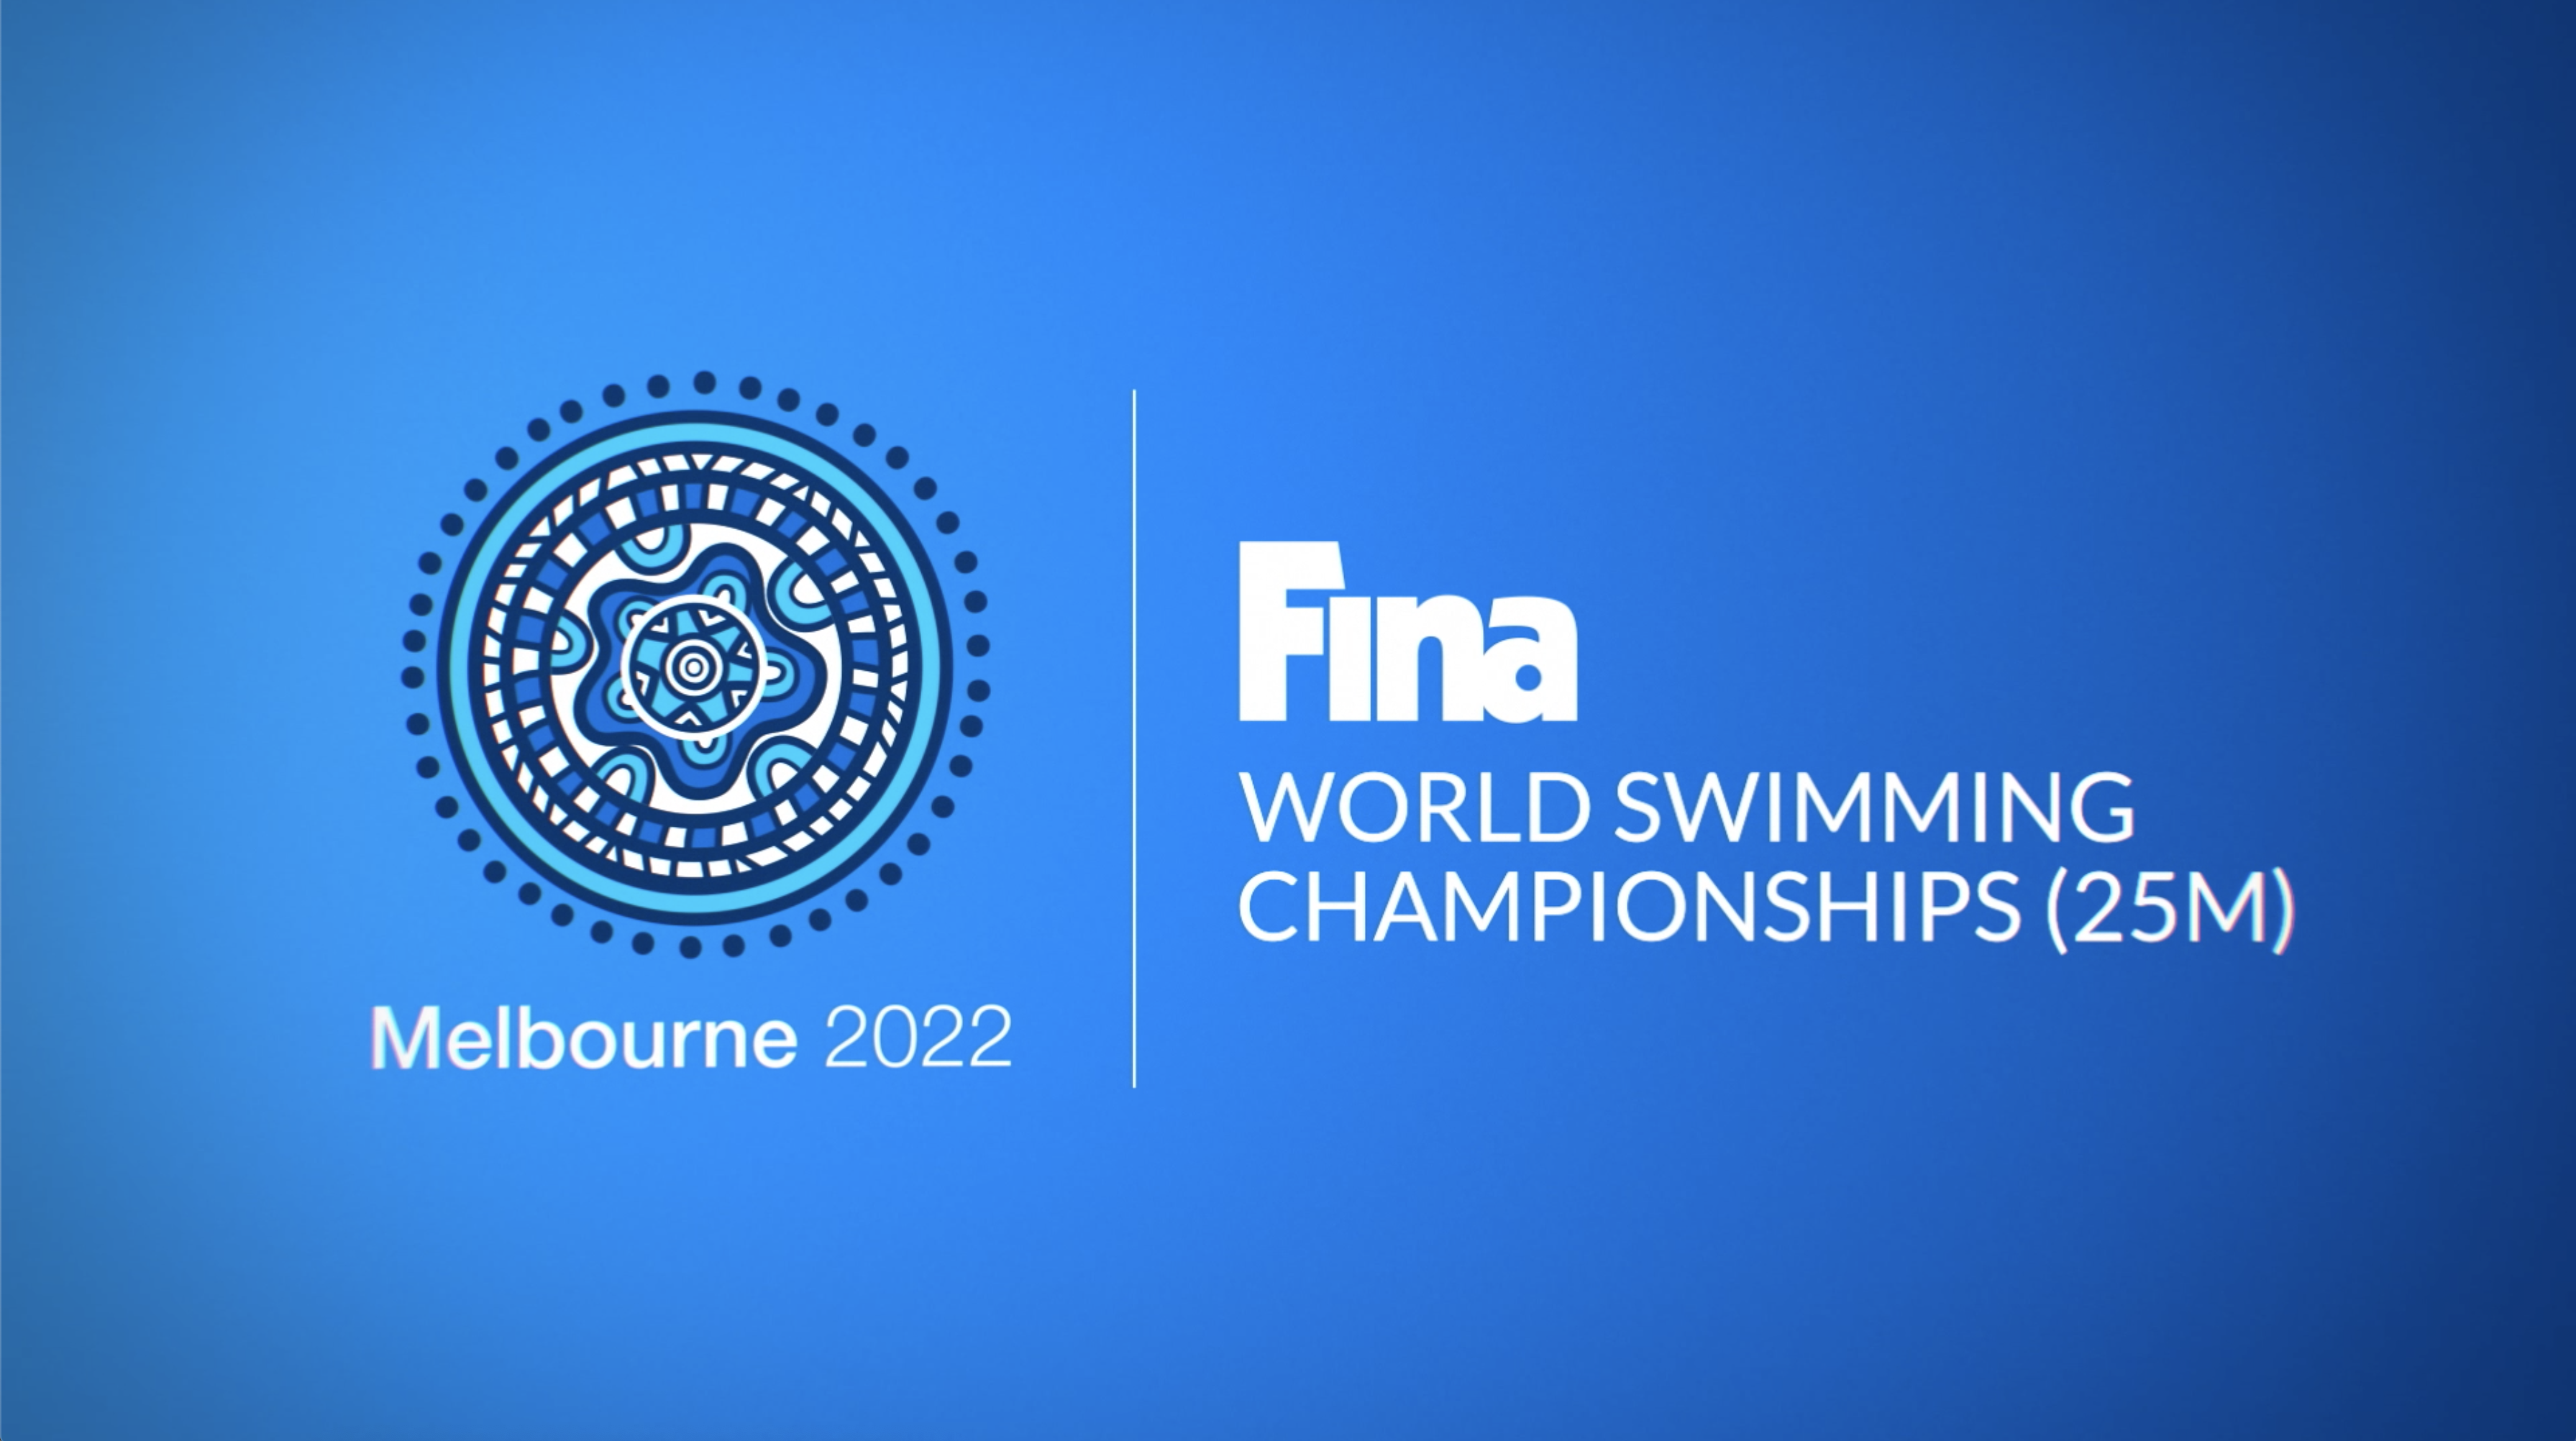 Gravity Media Australia Confirms Broadcast and Technology Undertakings to Deliver Complete Global Television Coverage of the FINA World Swimming Championships (25m) in Melbourne